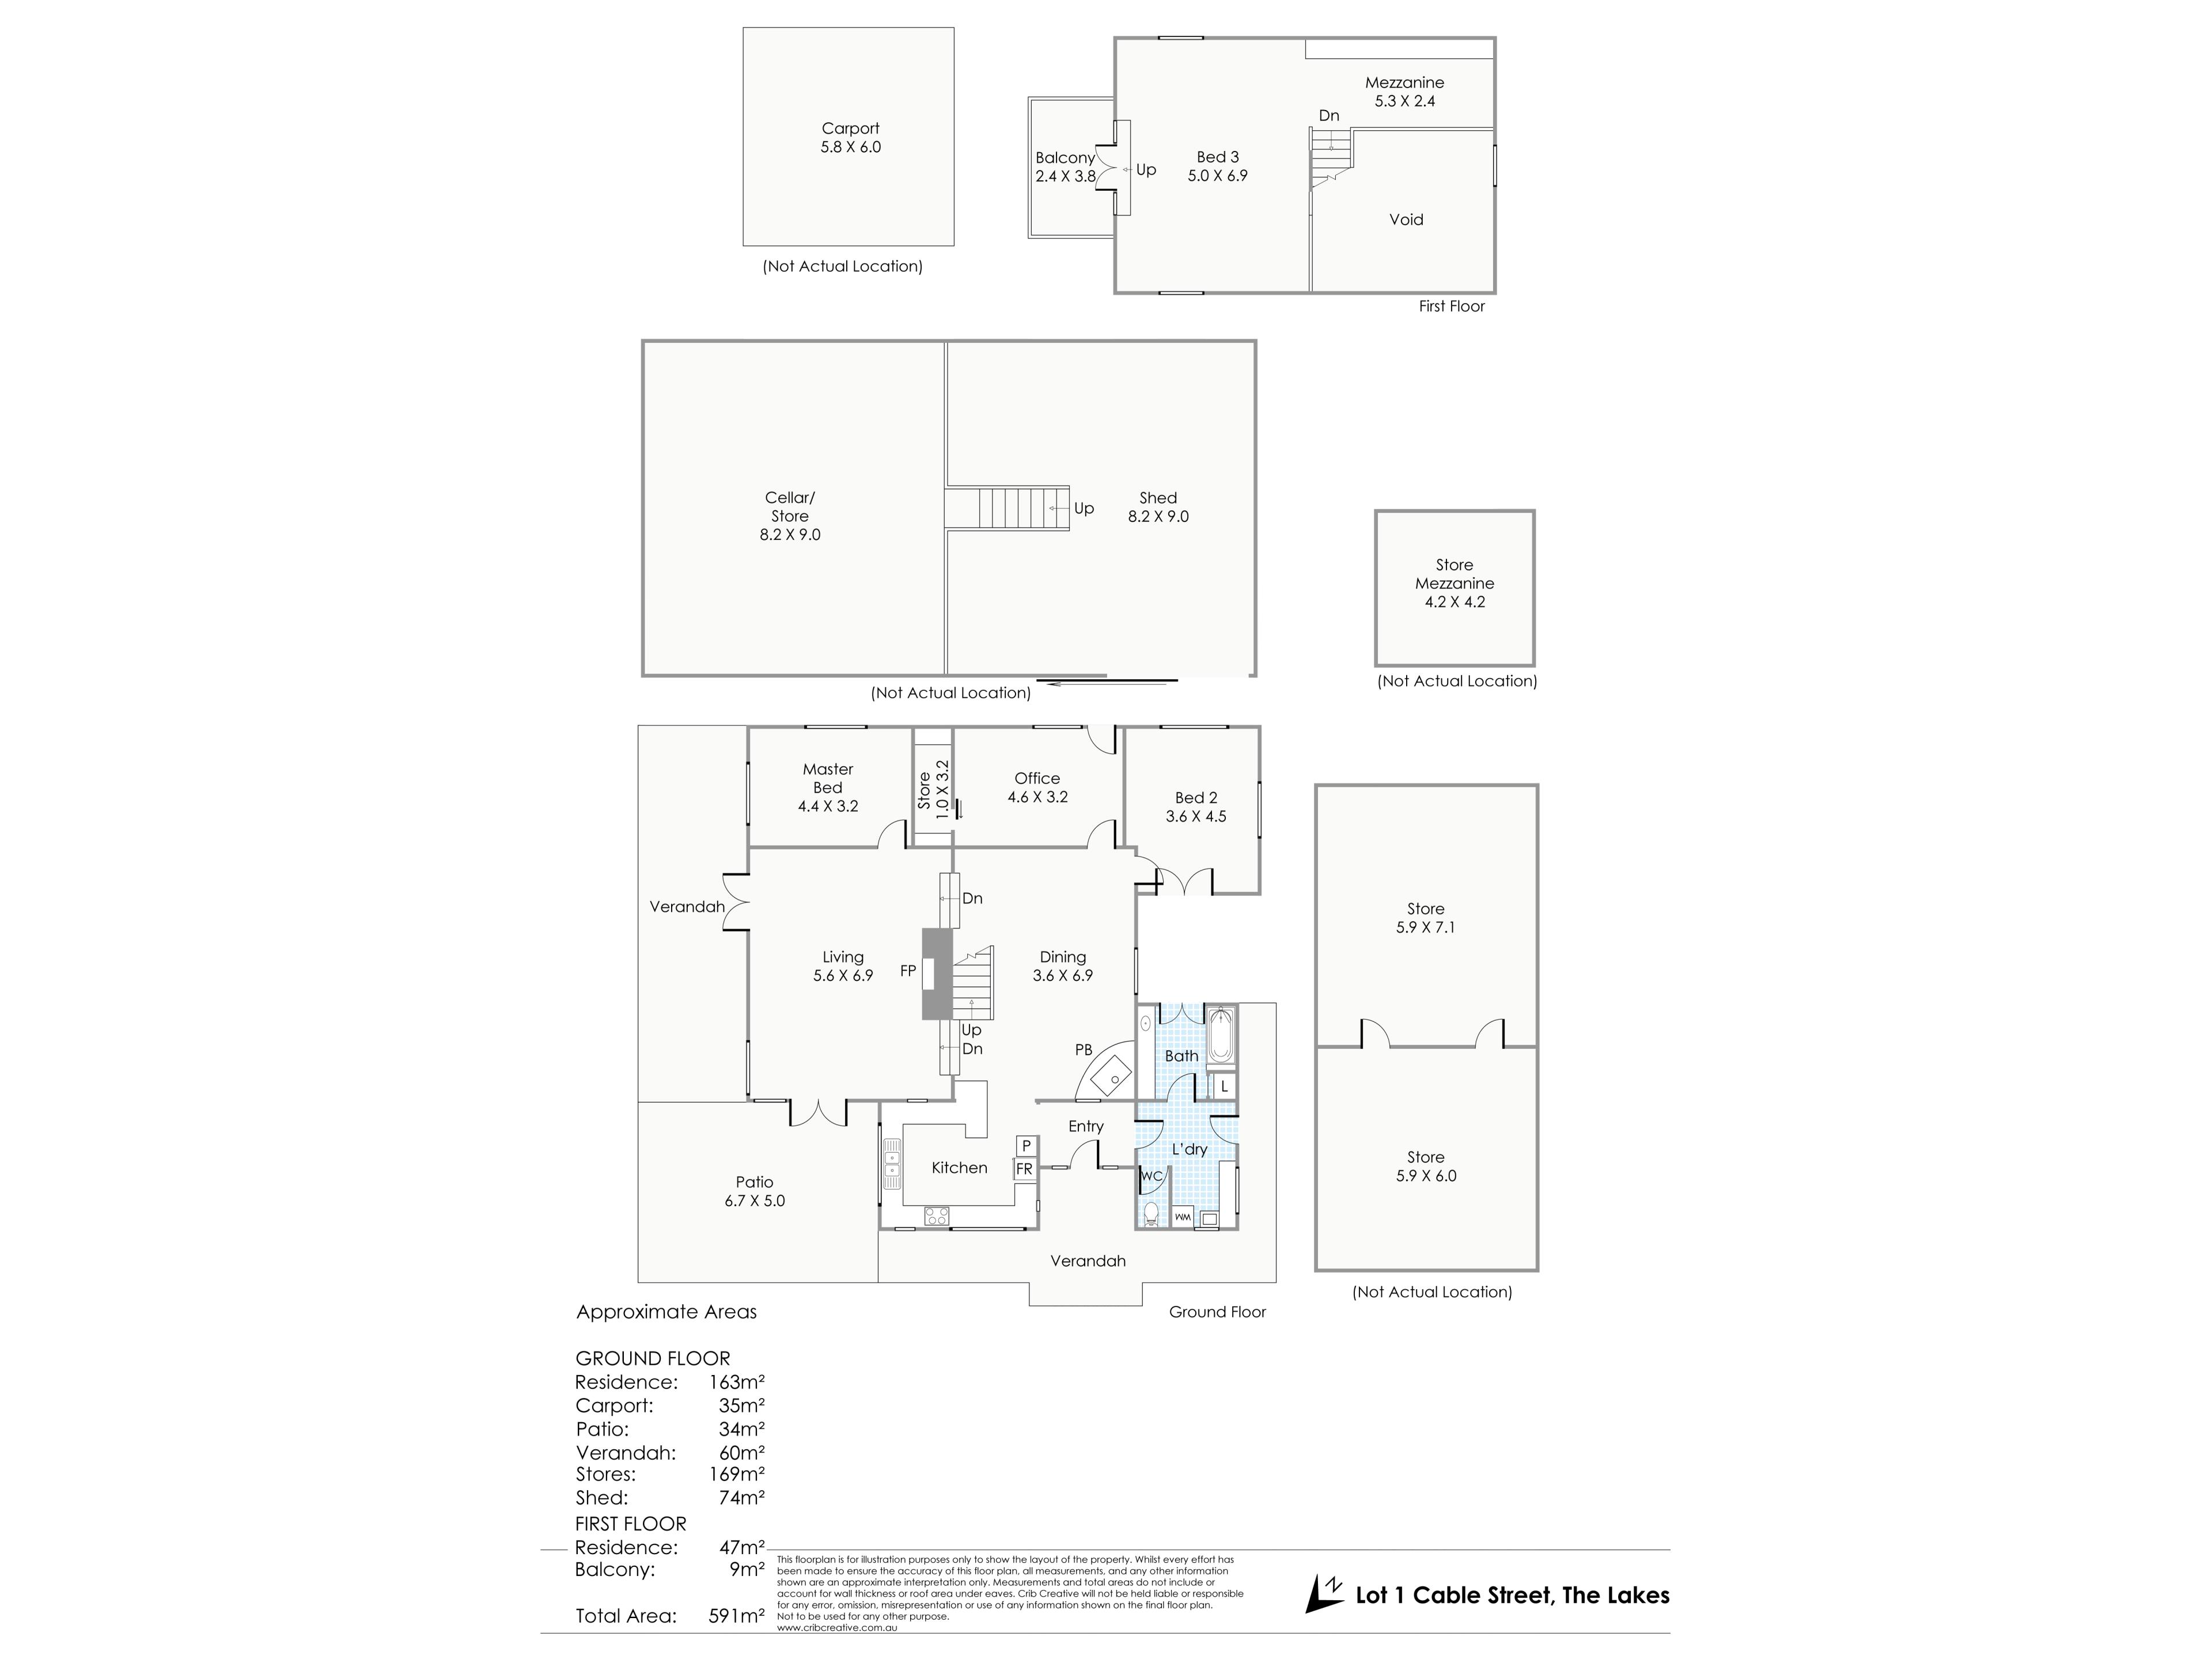 Property for sale in The Lakes : Earnshaws Real Estate